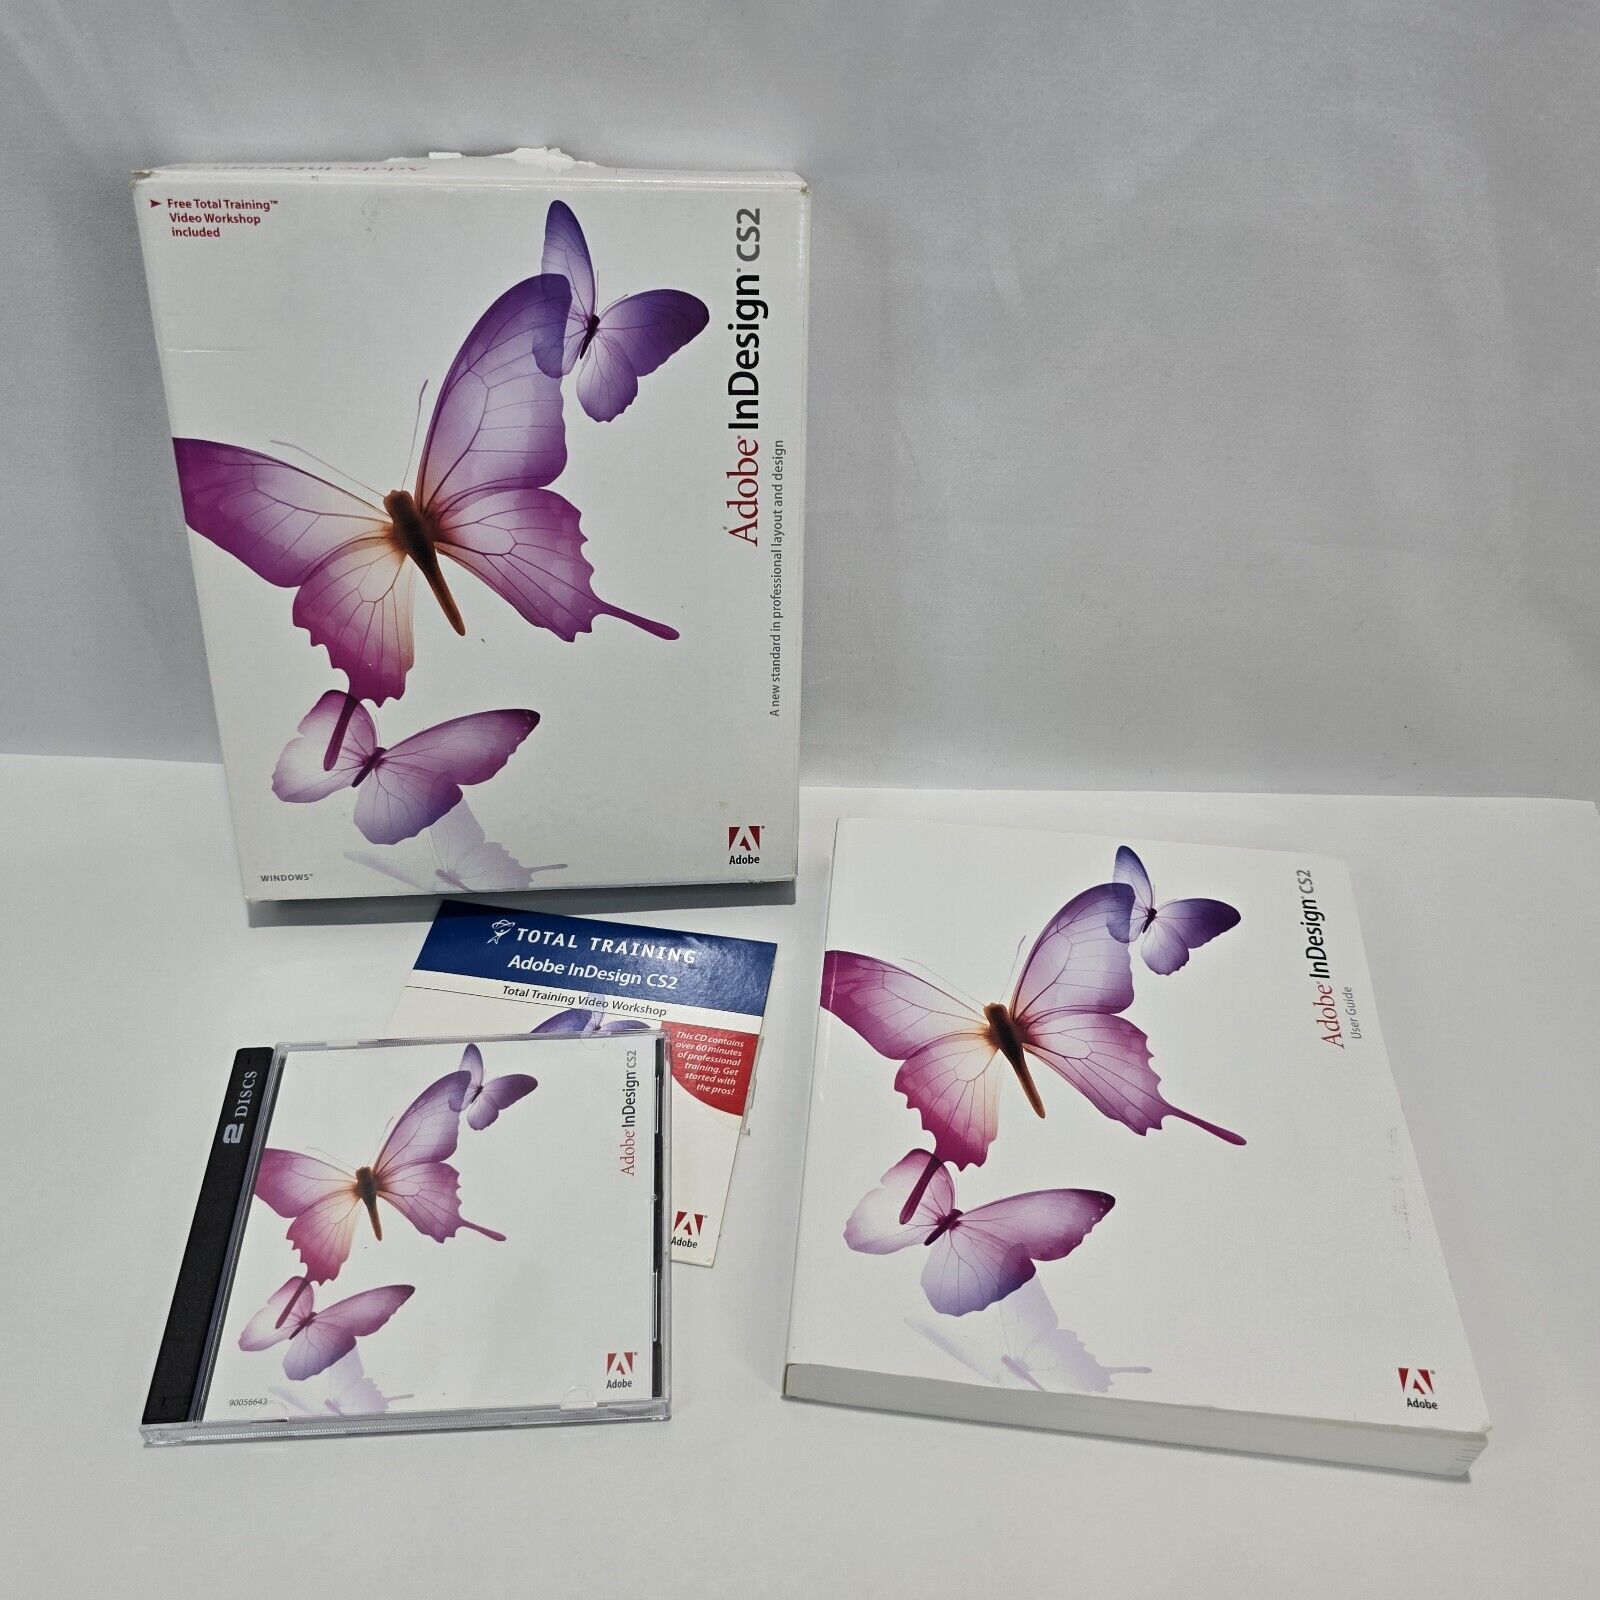 Adobe InDesign CS2 for Windows  Complete w/ User Guide & Total Training 27510753